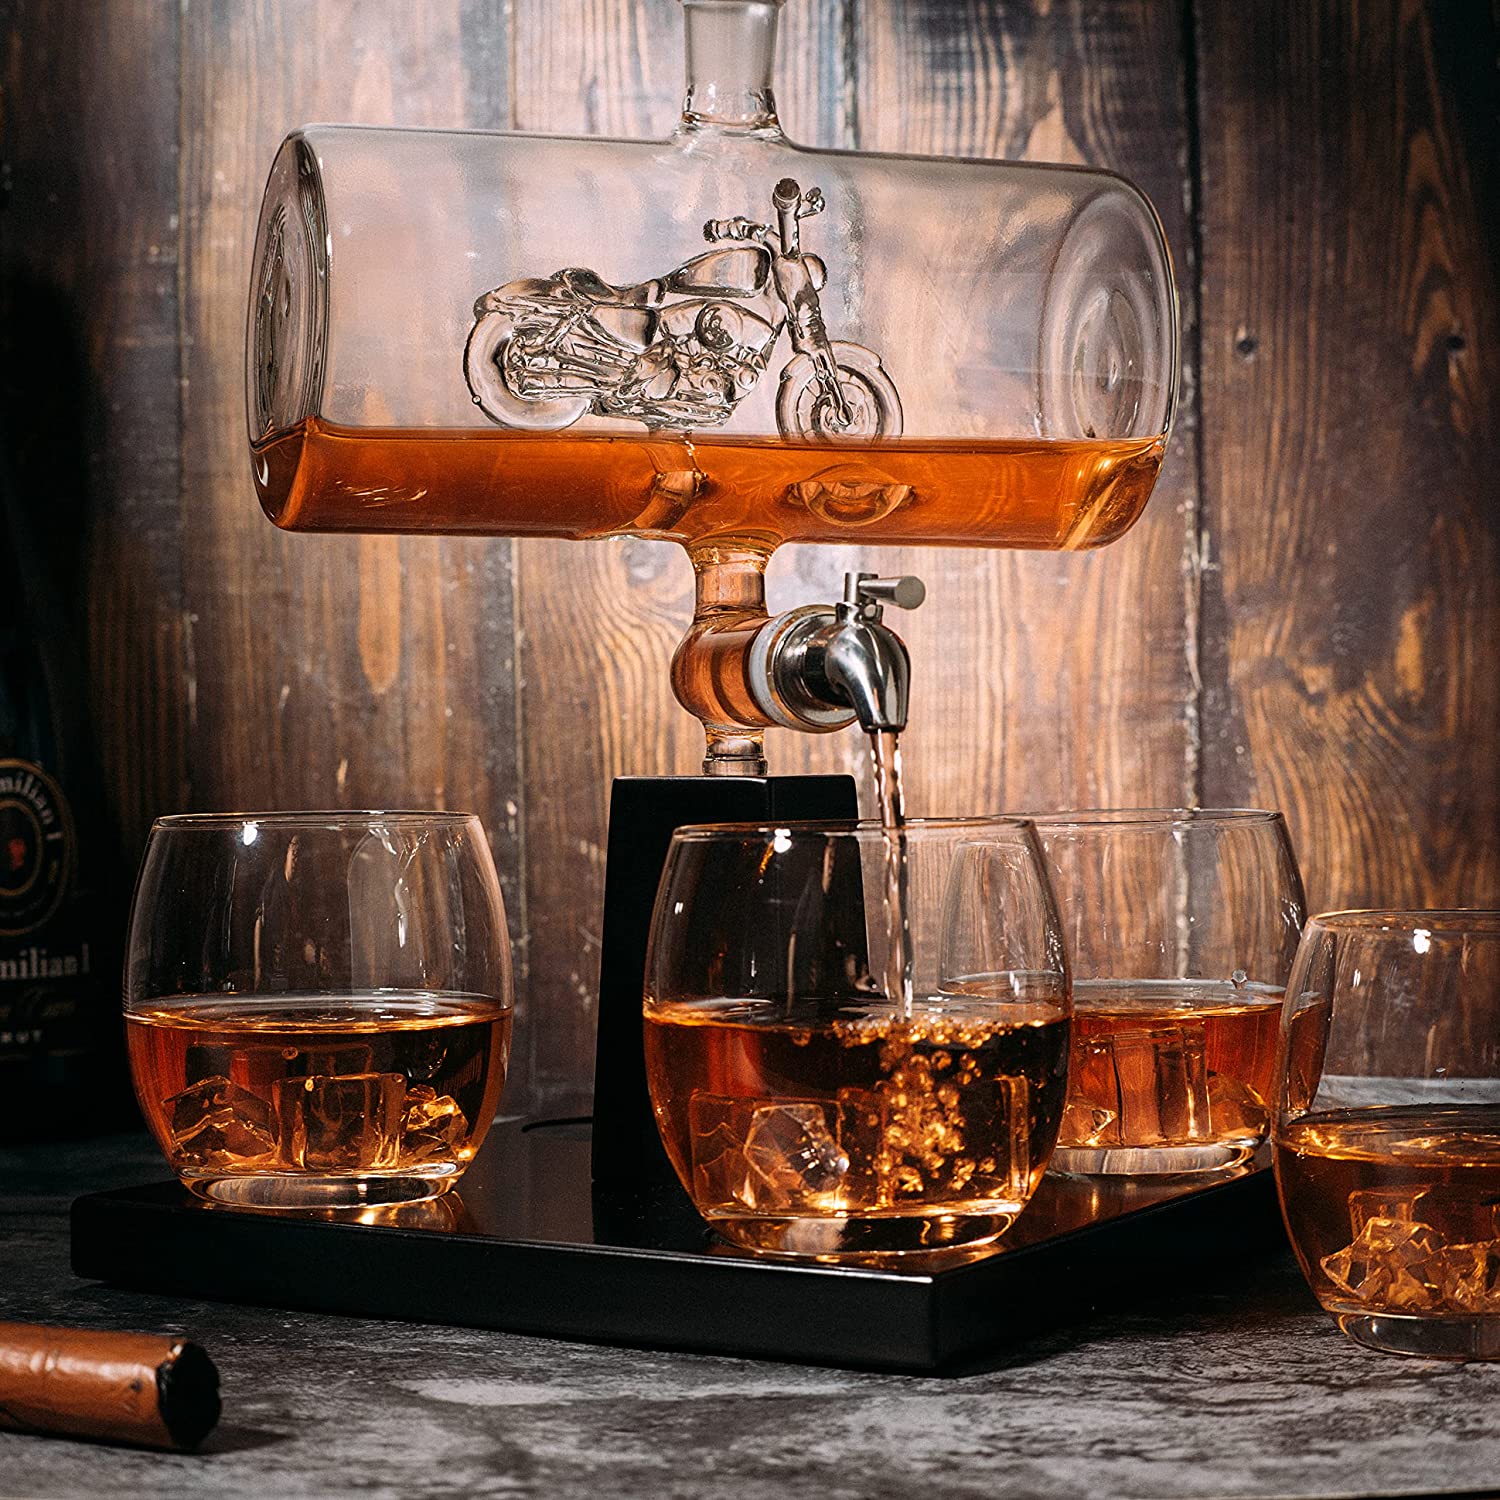 Motorcycle Decanter Whiskey & Wine Decanter Set 1100ml by The Wine Savant with 4 Whiskey Glasses, Motorcycle Gifts, Harley Davidson Motorbike Gifts, Drink Dispenser for Wine, Scotch, Bourbon 19"H 8"W-2